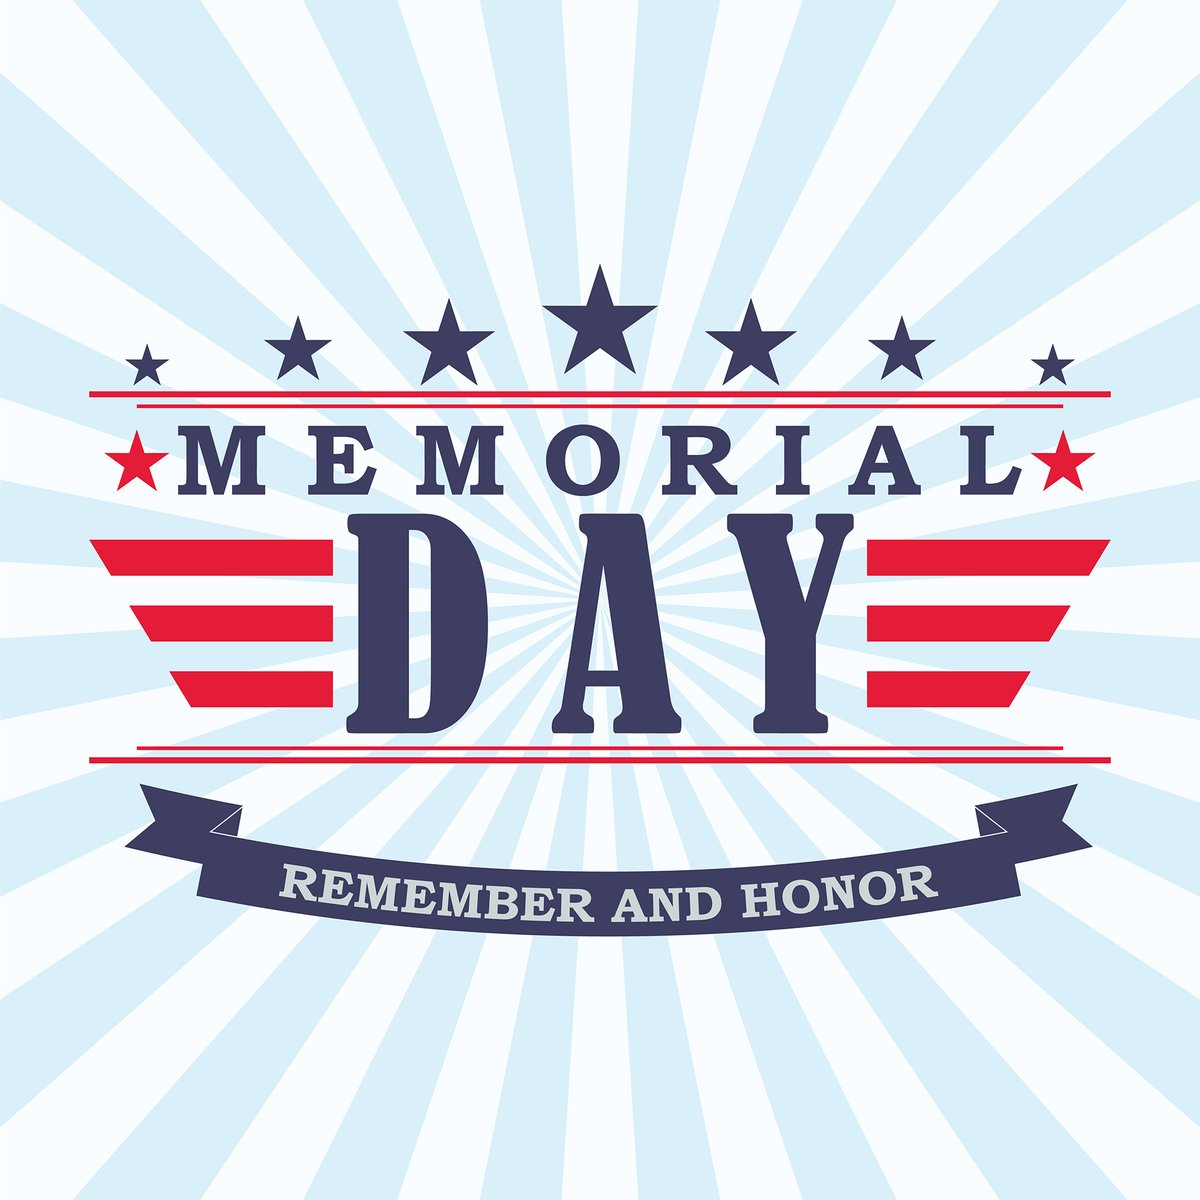 Our office will be closed Monday May 27, in observance of Memorial Day. Visit sandiego.gov/holiday for a full list of holiday hours for City services and facilities.